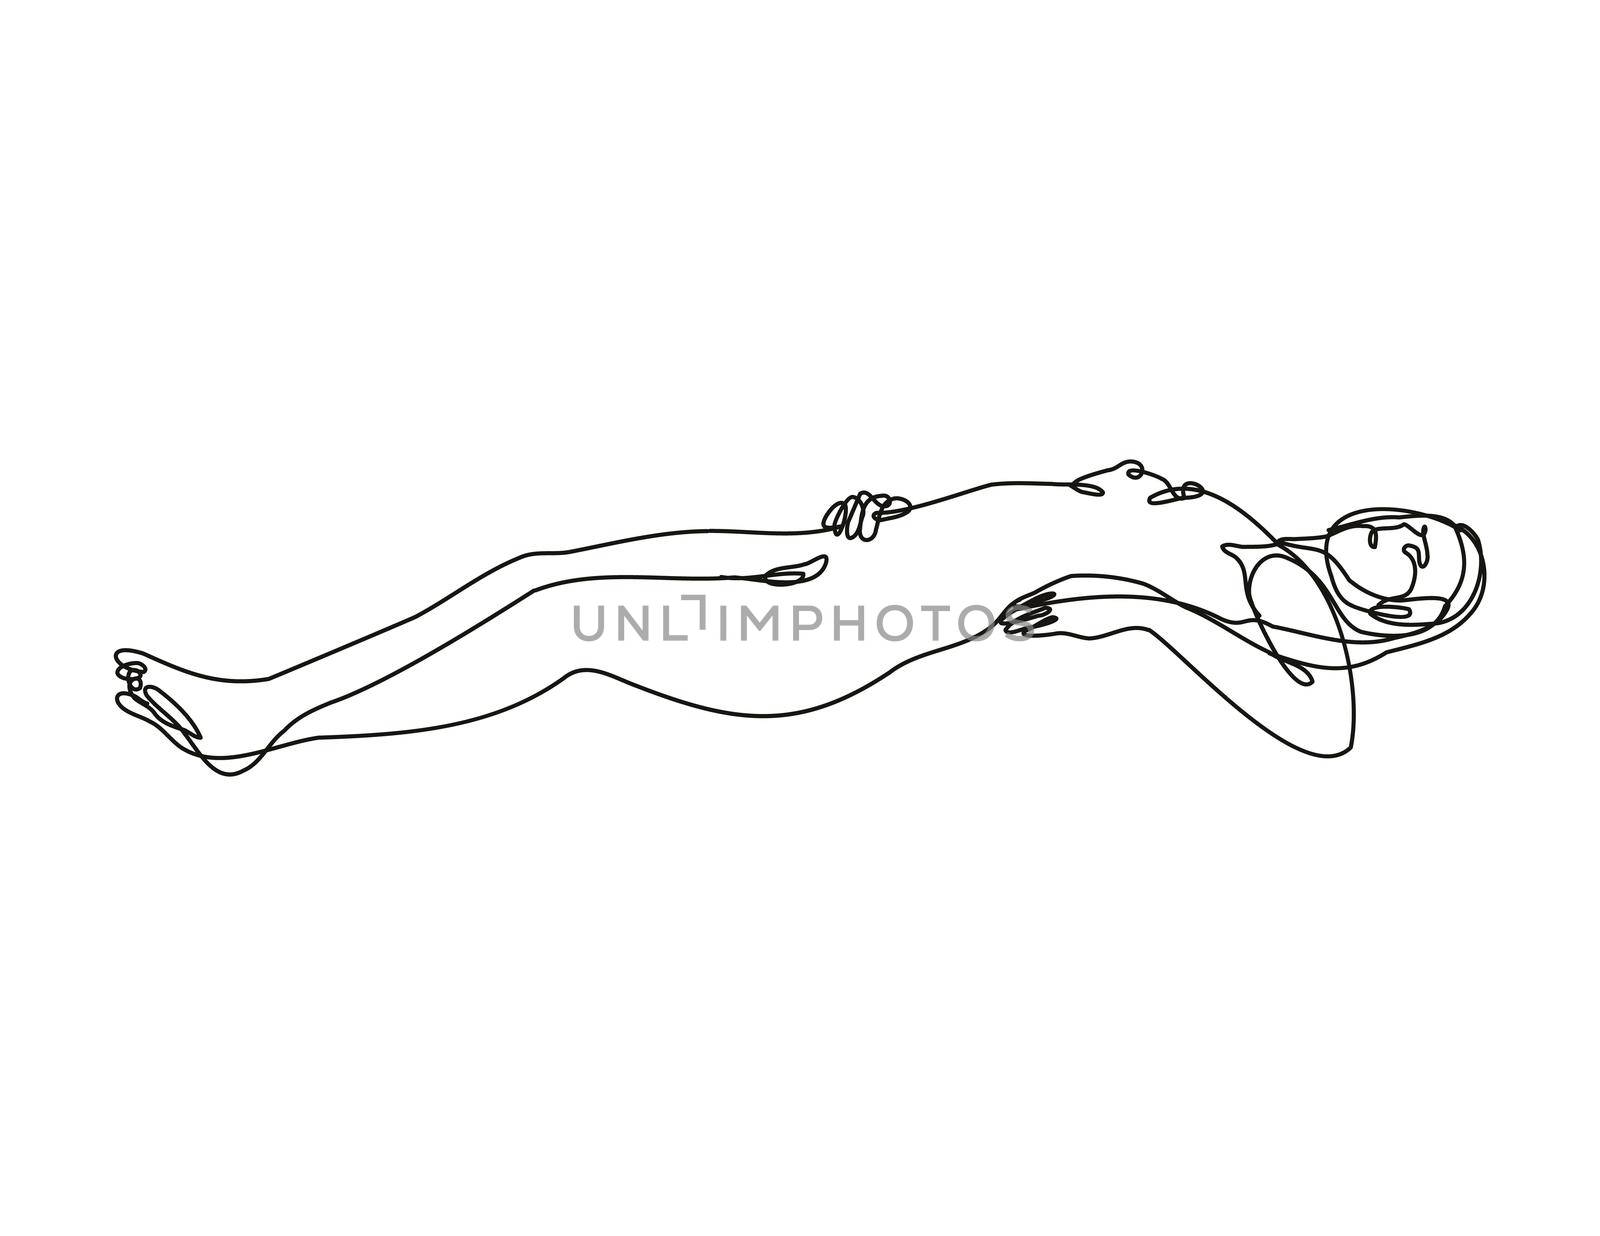 Continuous line drawing illustration of a female nude reclining Lying on Back or Supine Position done in doodle style in black and white on isolated background. 